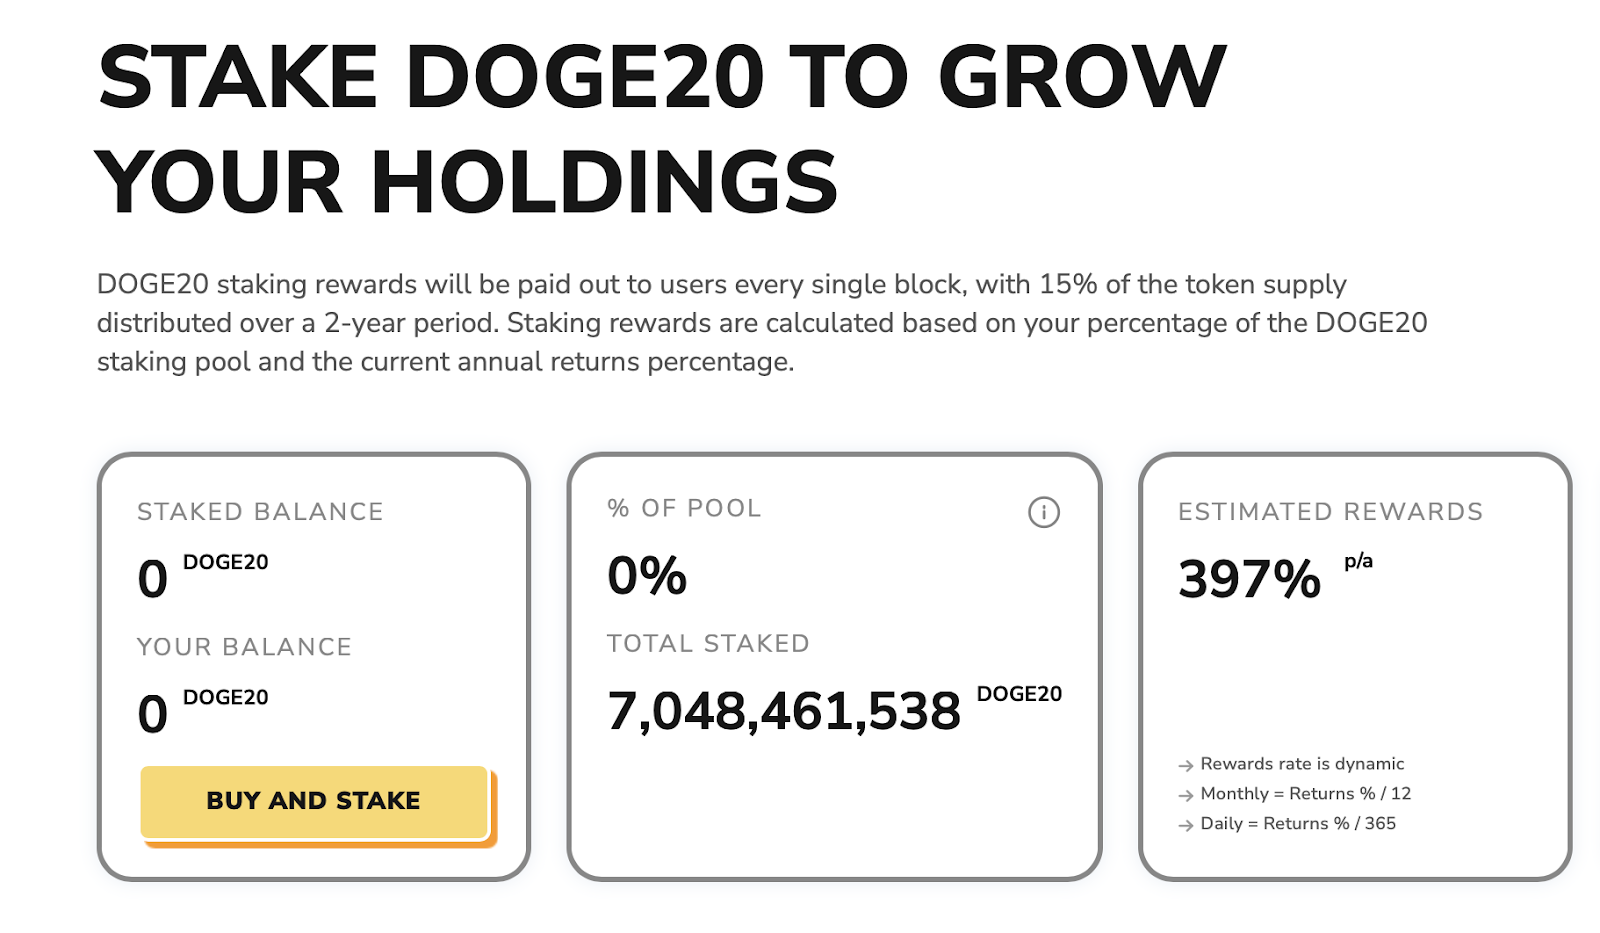 DOGE20 Staking 